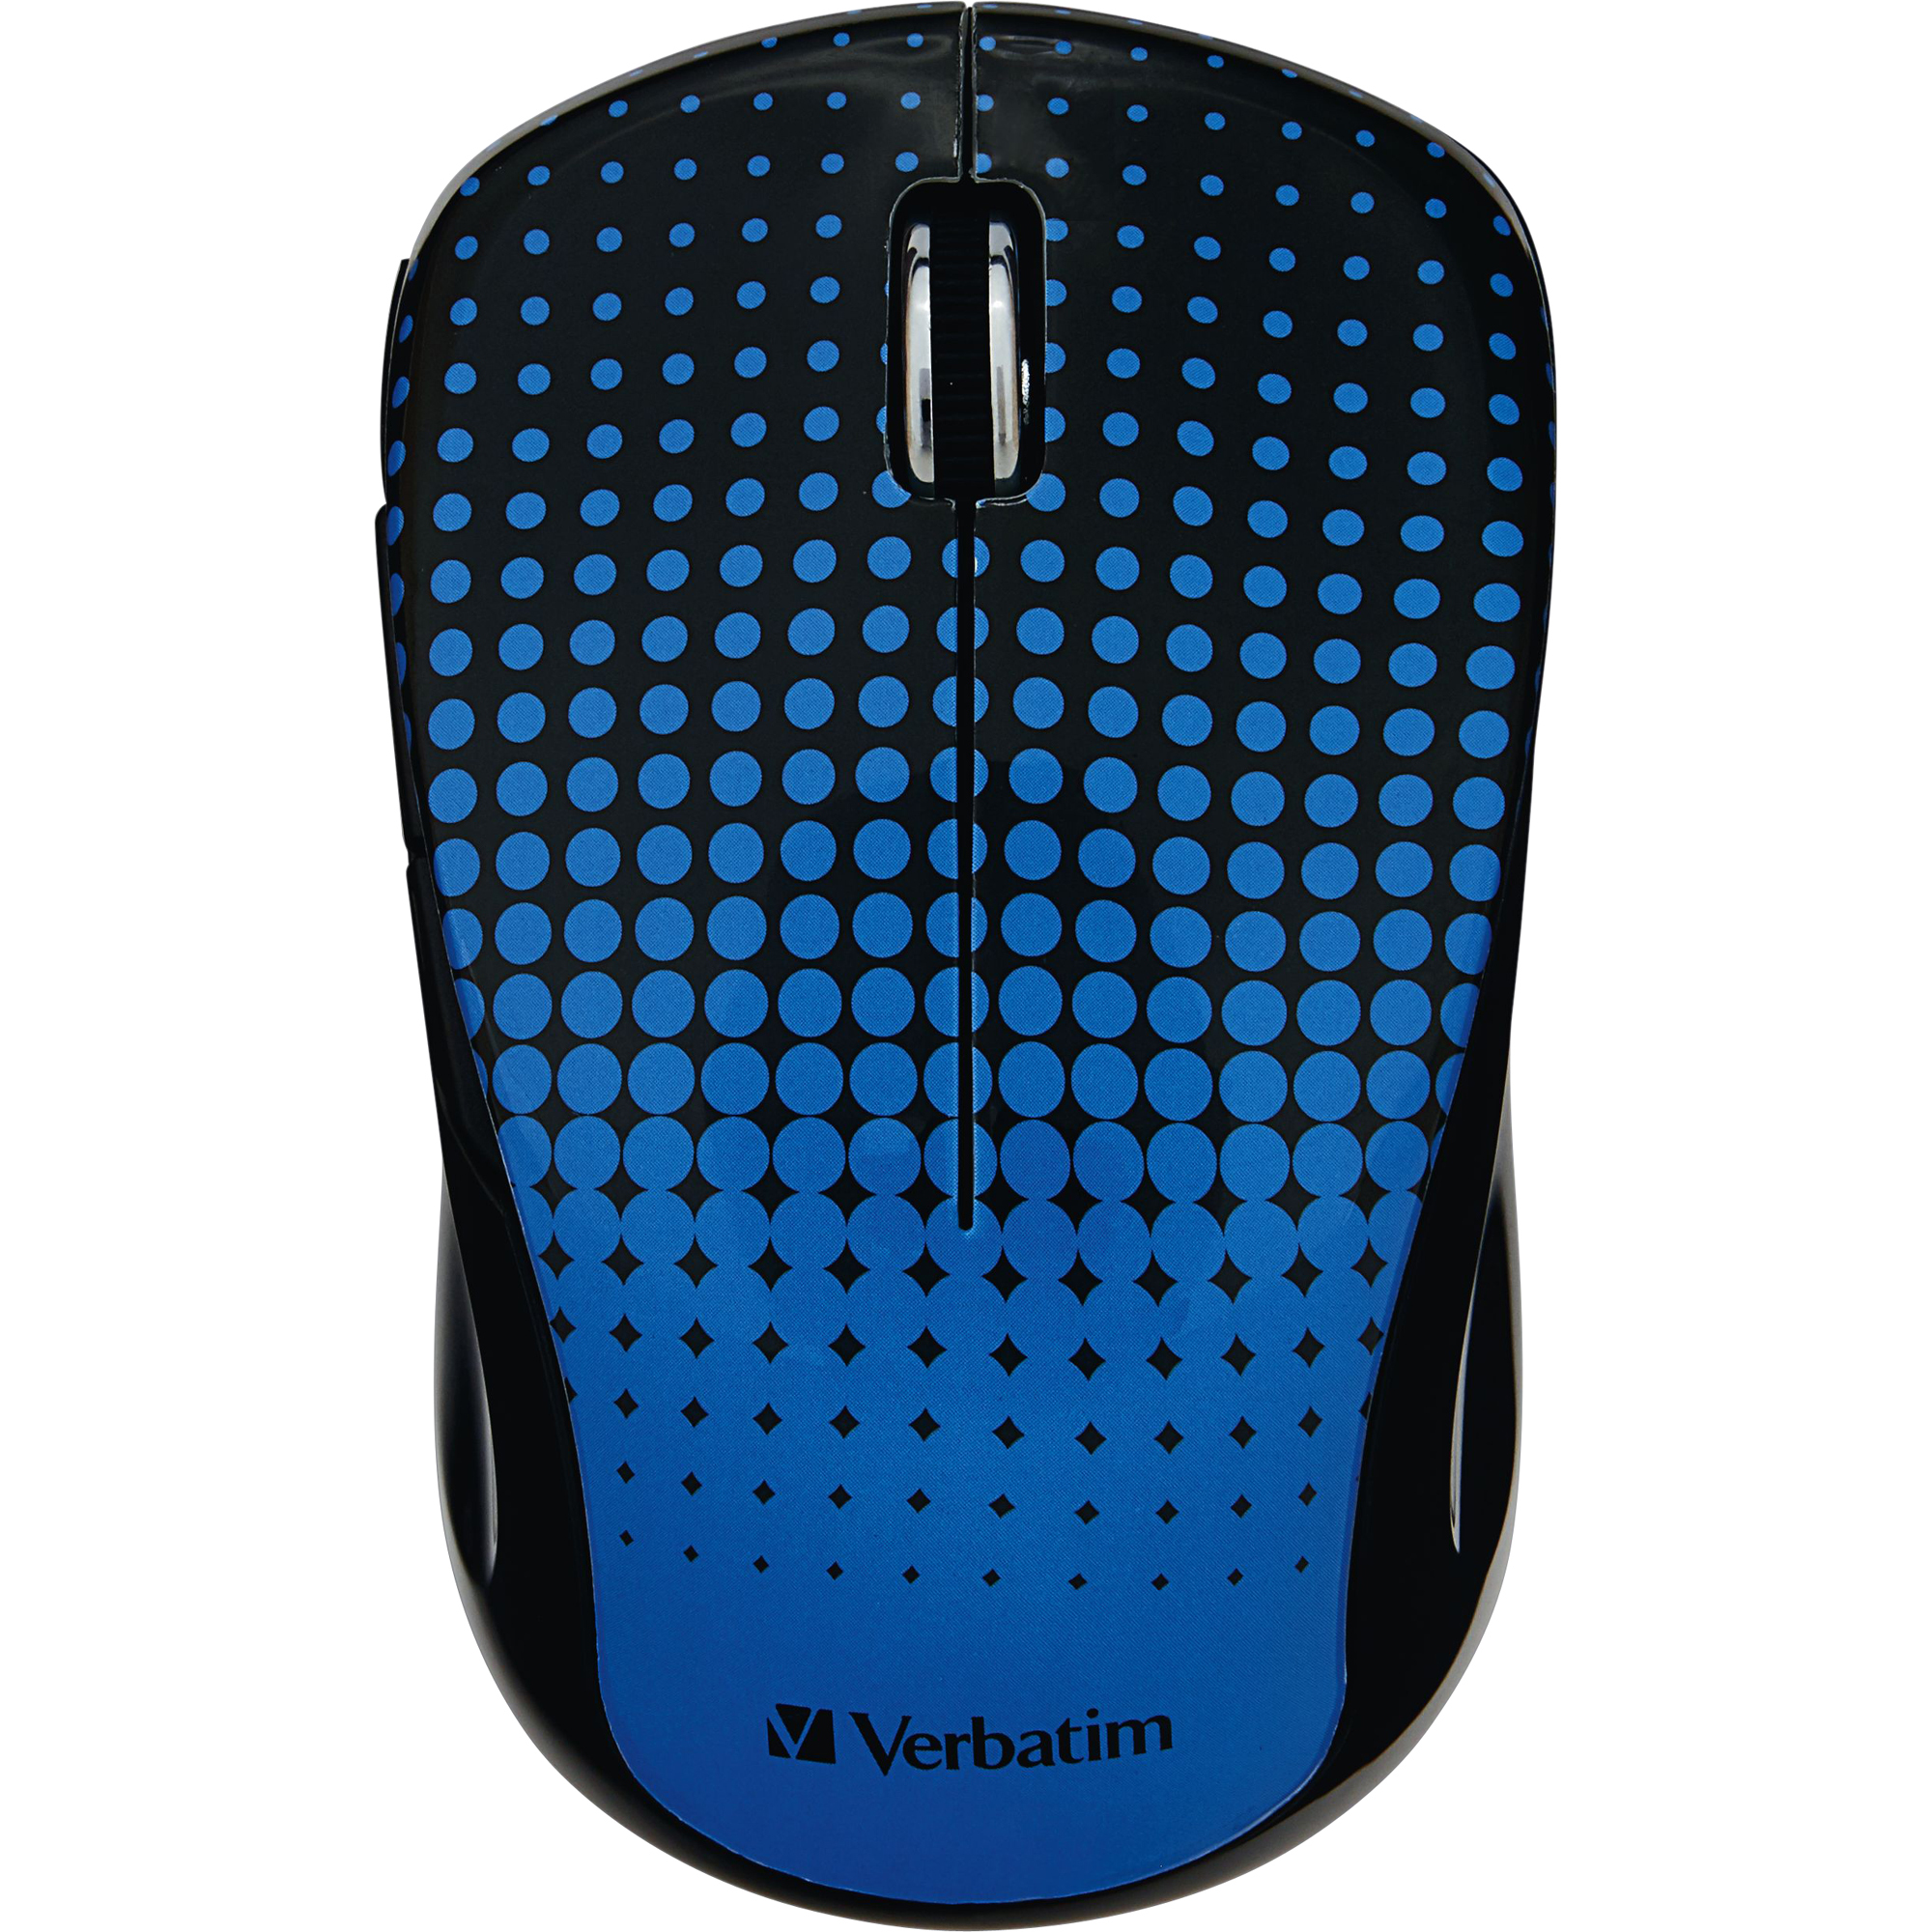 Pre-Owned Wireless Notebook Multi-Trac Blue LED Mouse Dot Pattern - image 1 of 1